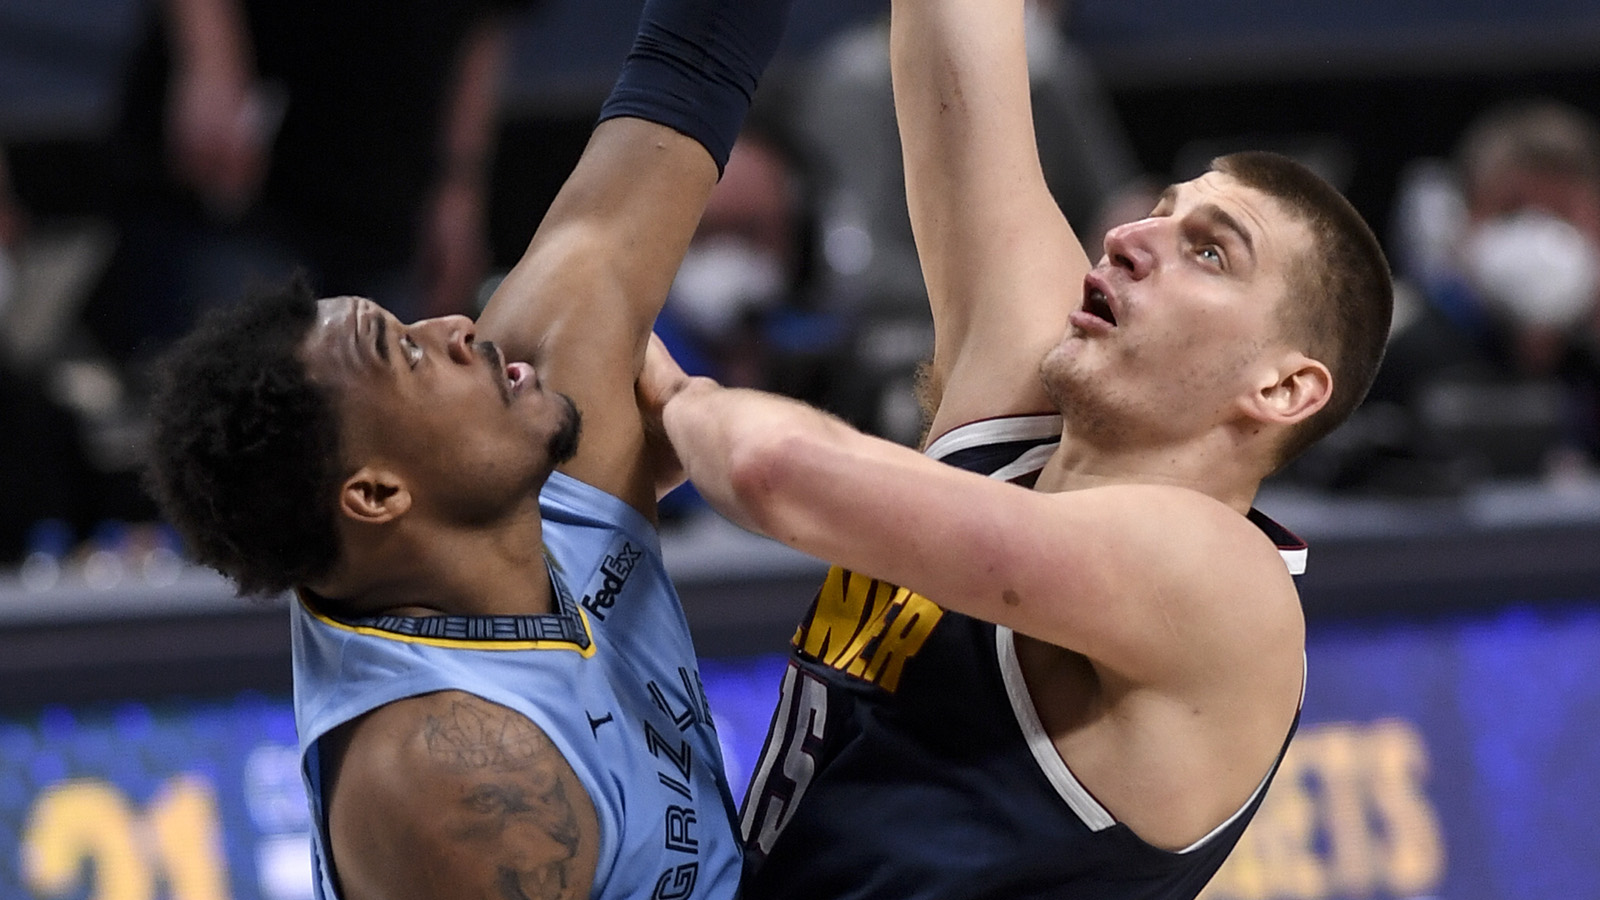 Nikola Jokic of the Denver Nuggets scores over Xavier Tillman of the Memphis Grizzlies during the second overtime at Ball Arena on April 19, 2021.